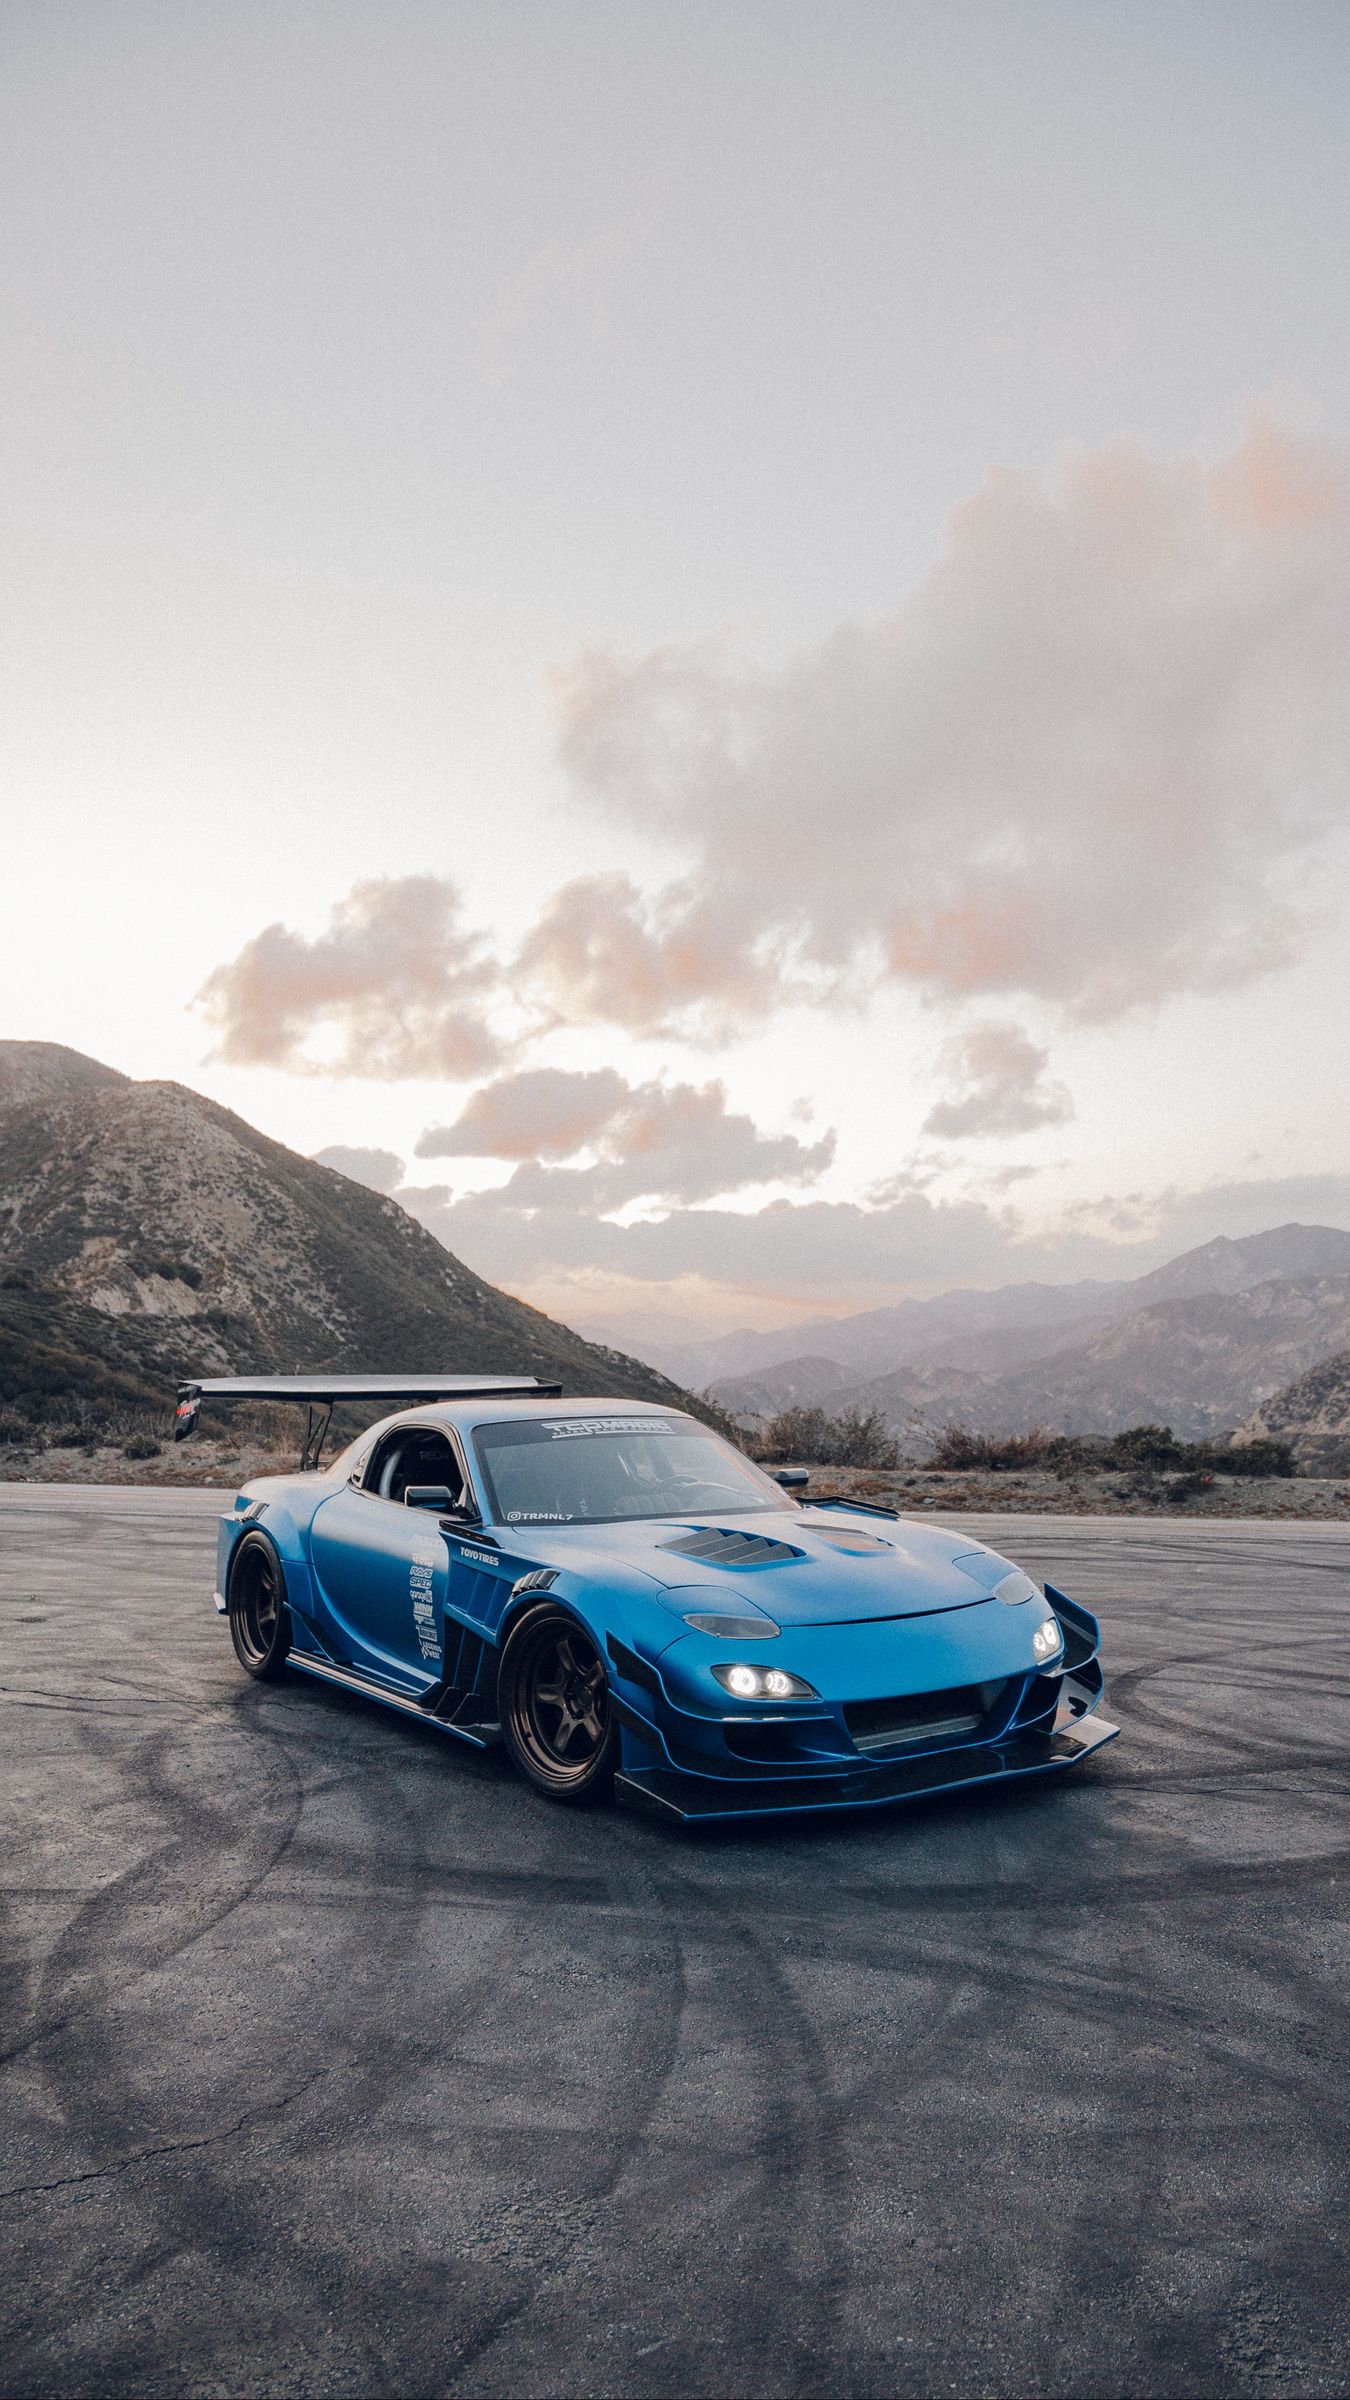 Download Wallpaper 1350x2400 Mazda Rx 7 Mazda Car Blue Drift Asphalt Mountains Iphone 8 7 6s 6 For Parallax Hd Background